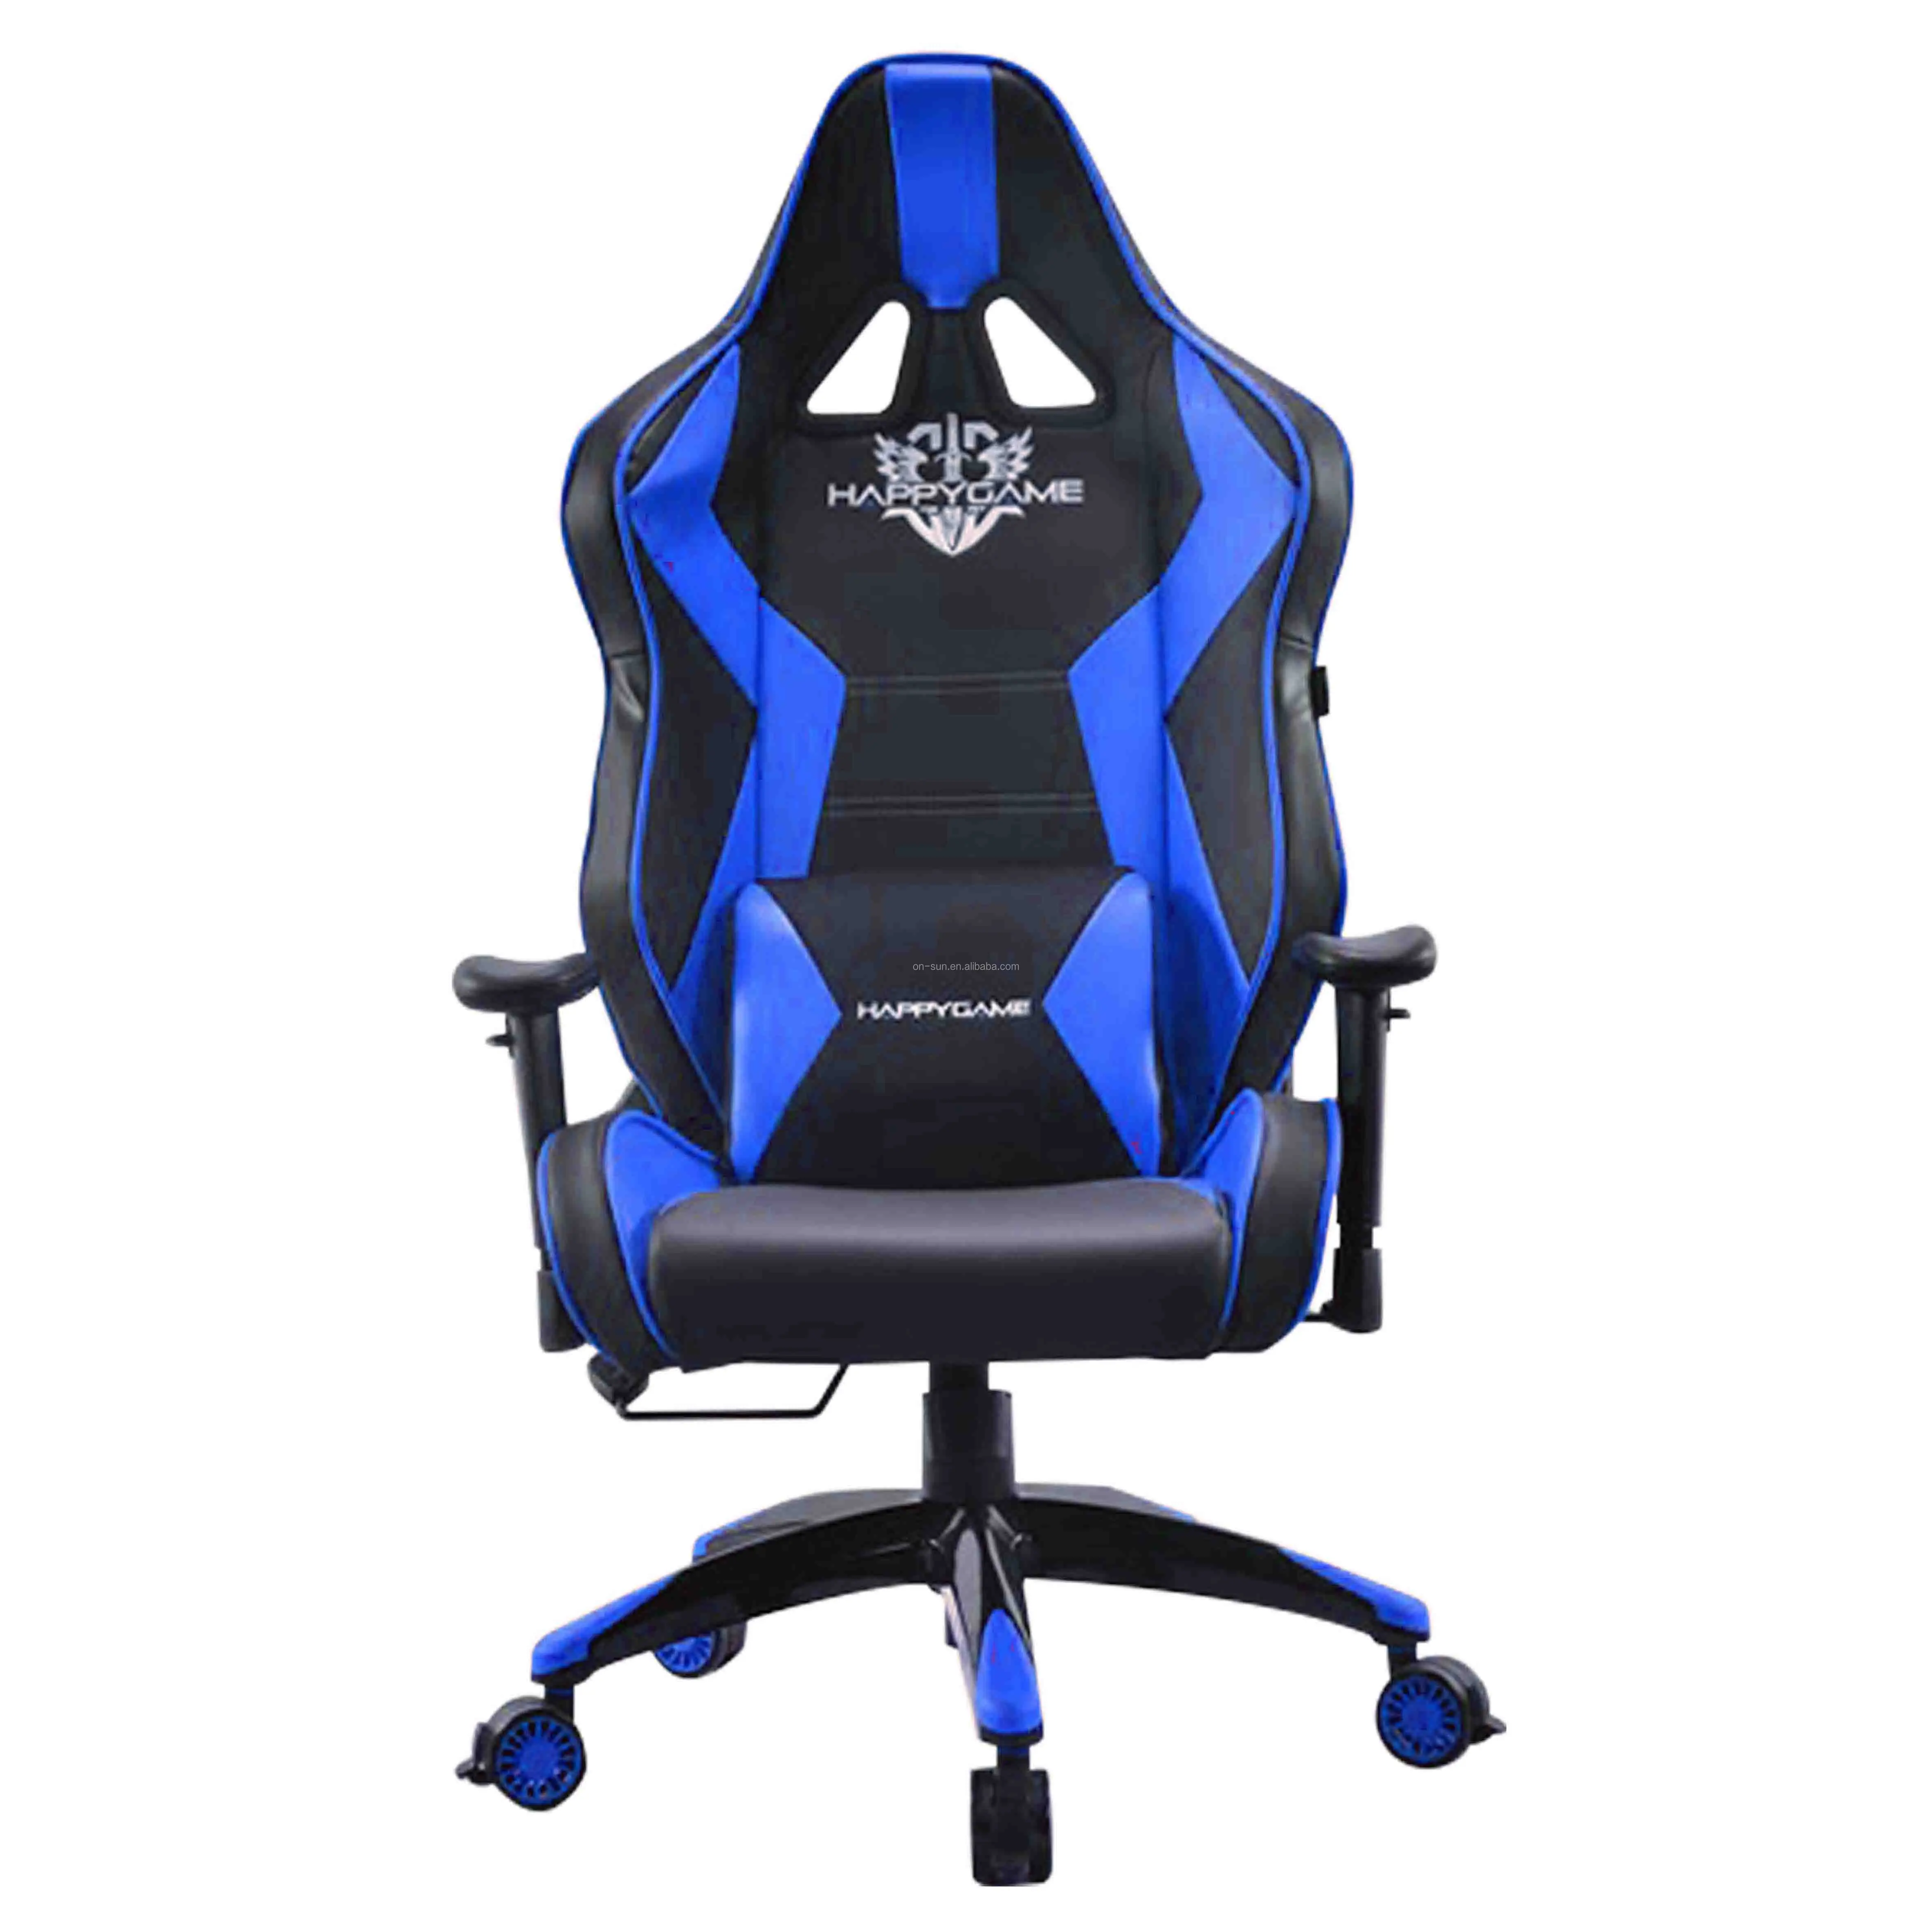 Racing Chair Gaming Os 7608 Bule Pc Office Furniture Home Office Modern Pu Or Fabric Material Metal Adjustable Height Iron Buy Kids Gaming Chairs Office Racing Chair Adult Pc Gaming Chair Custom Gaming